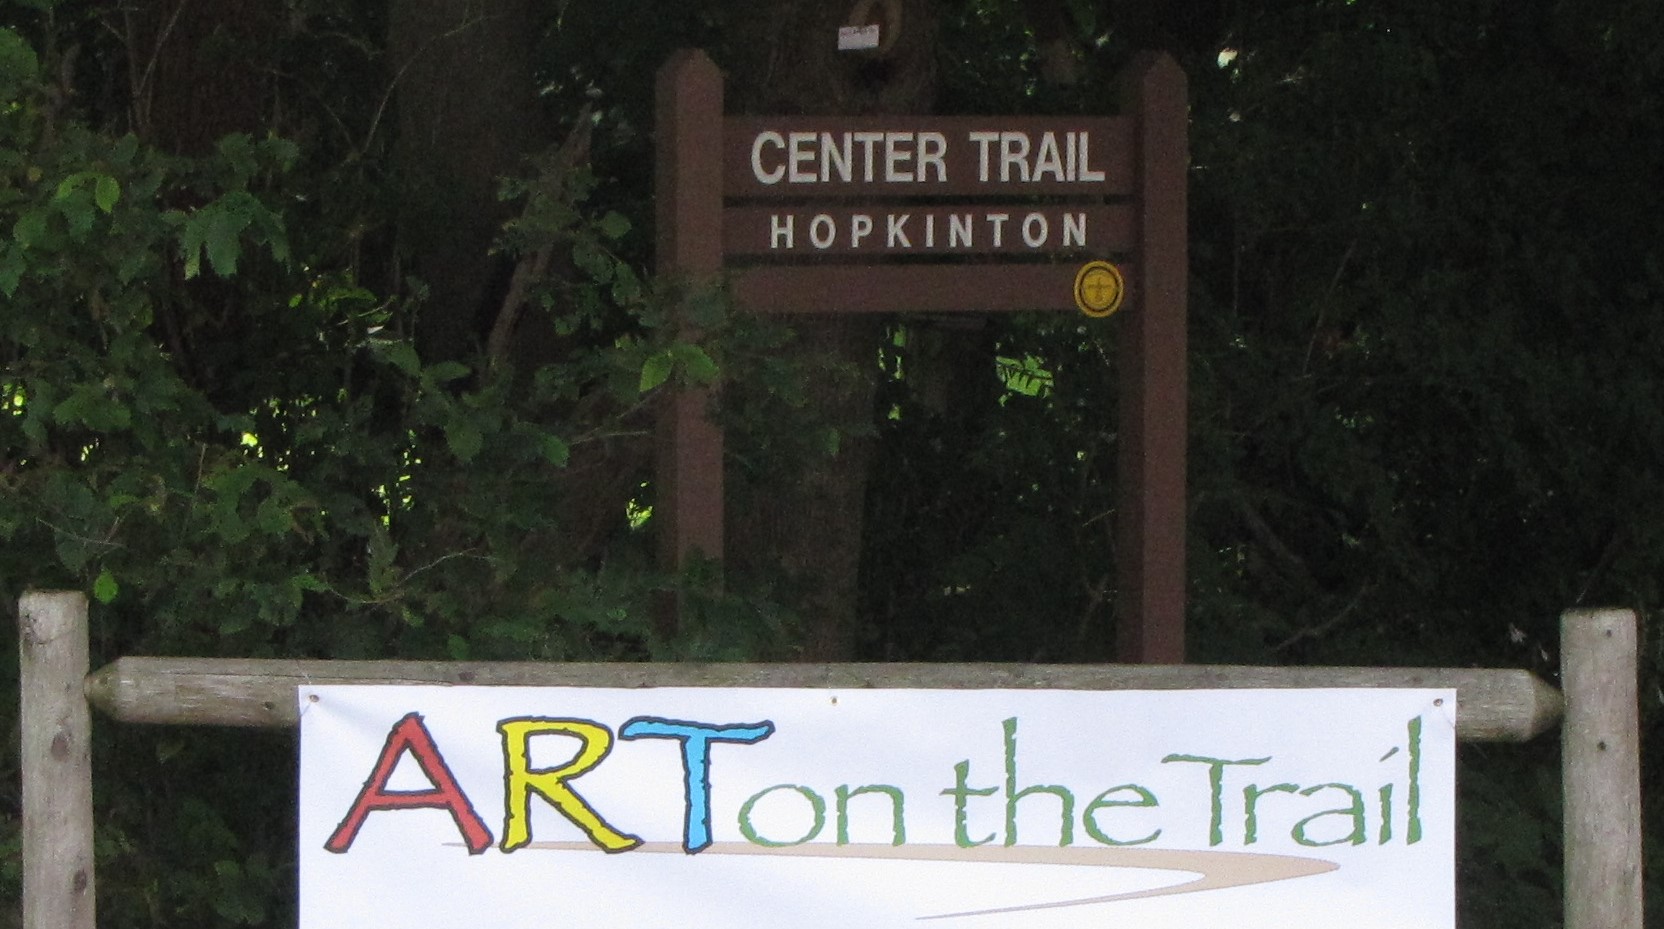 Artwork submissions sought for Art on the Trail display in October